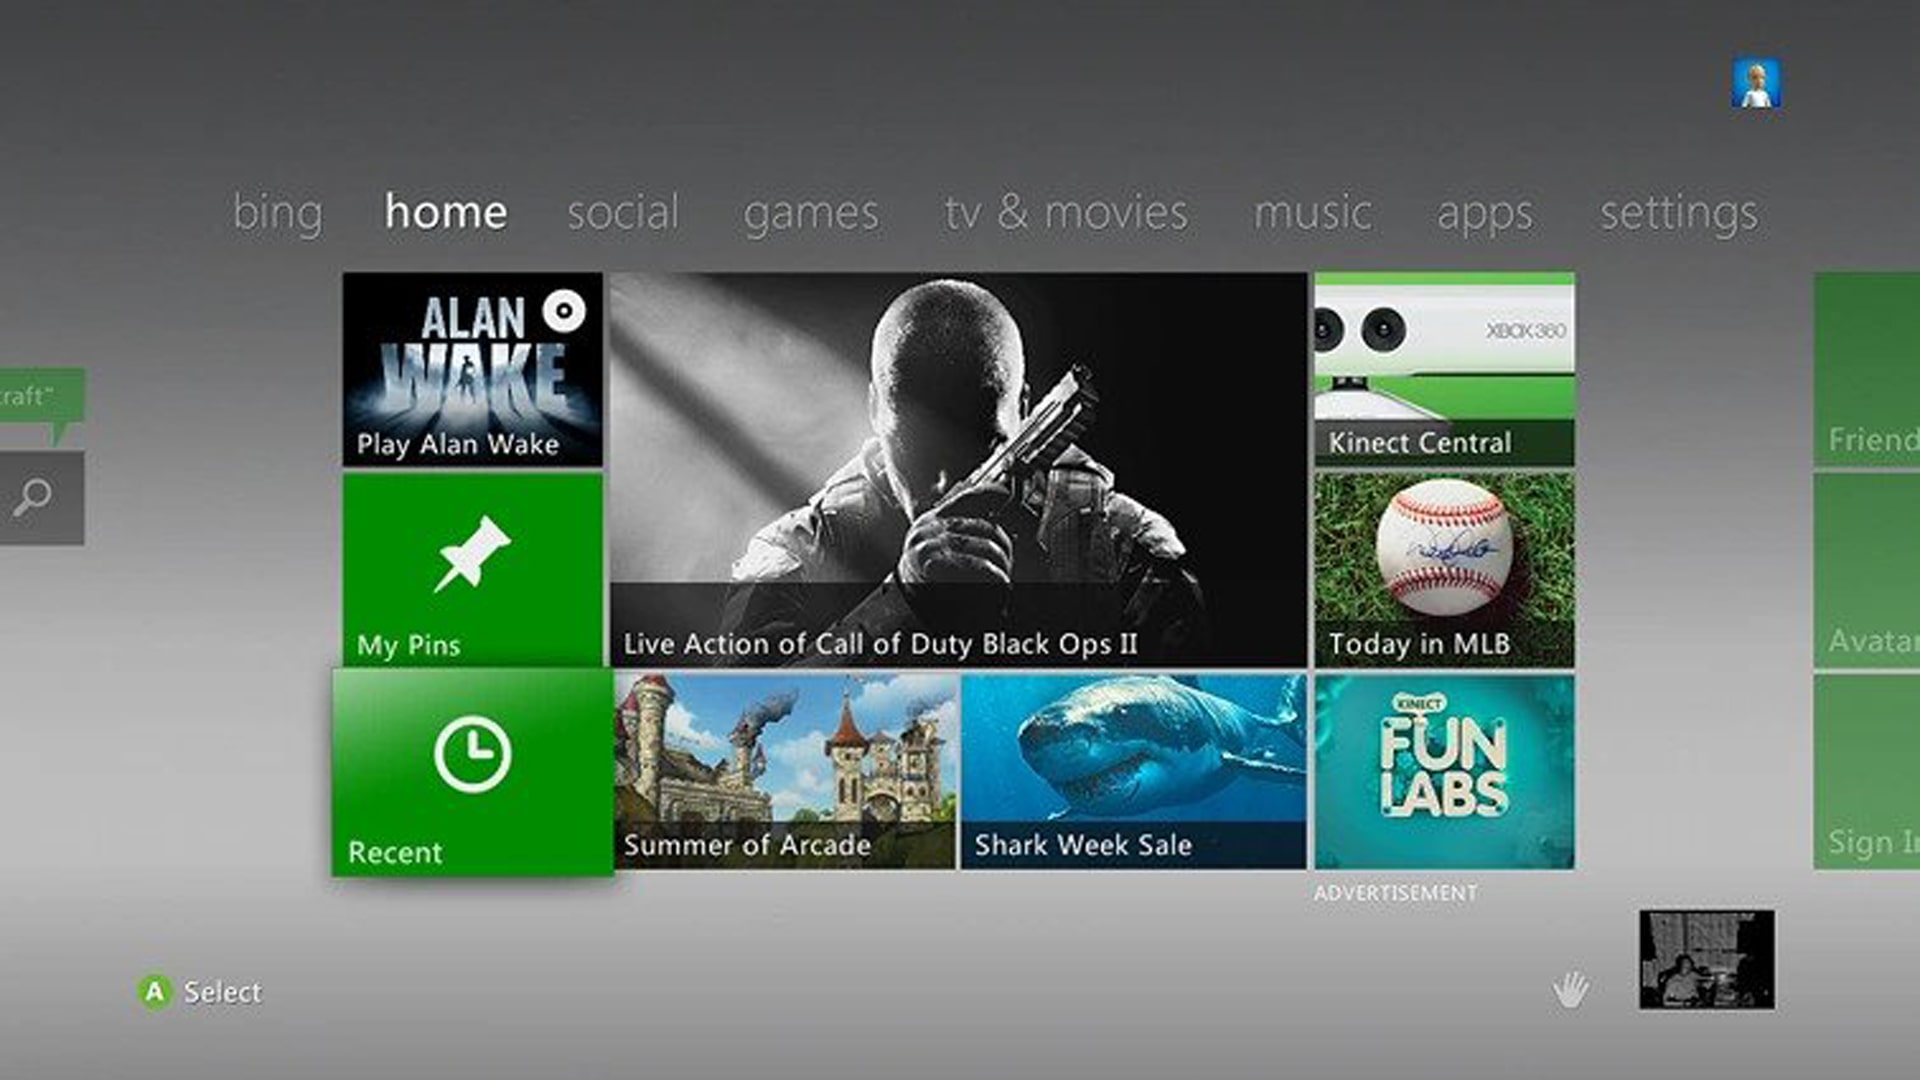 A screenshot of the Xbox 360 dashboard, showcasing its online services and features.